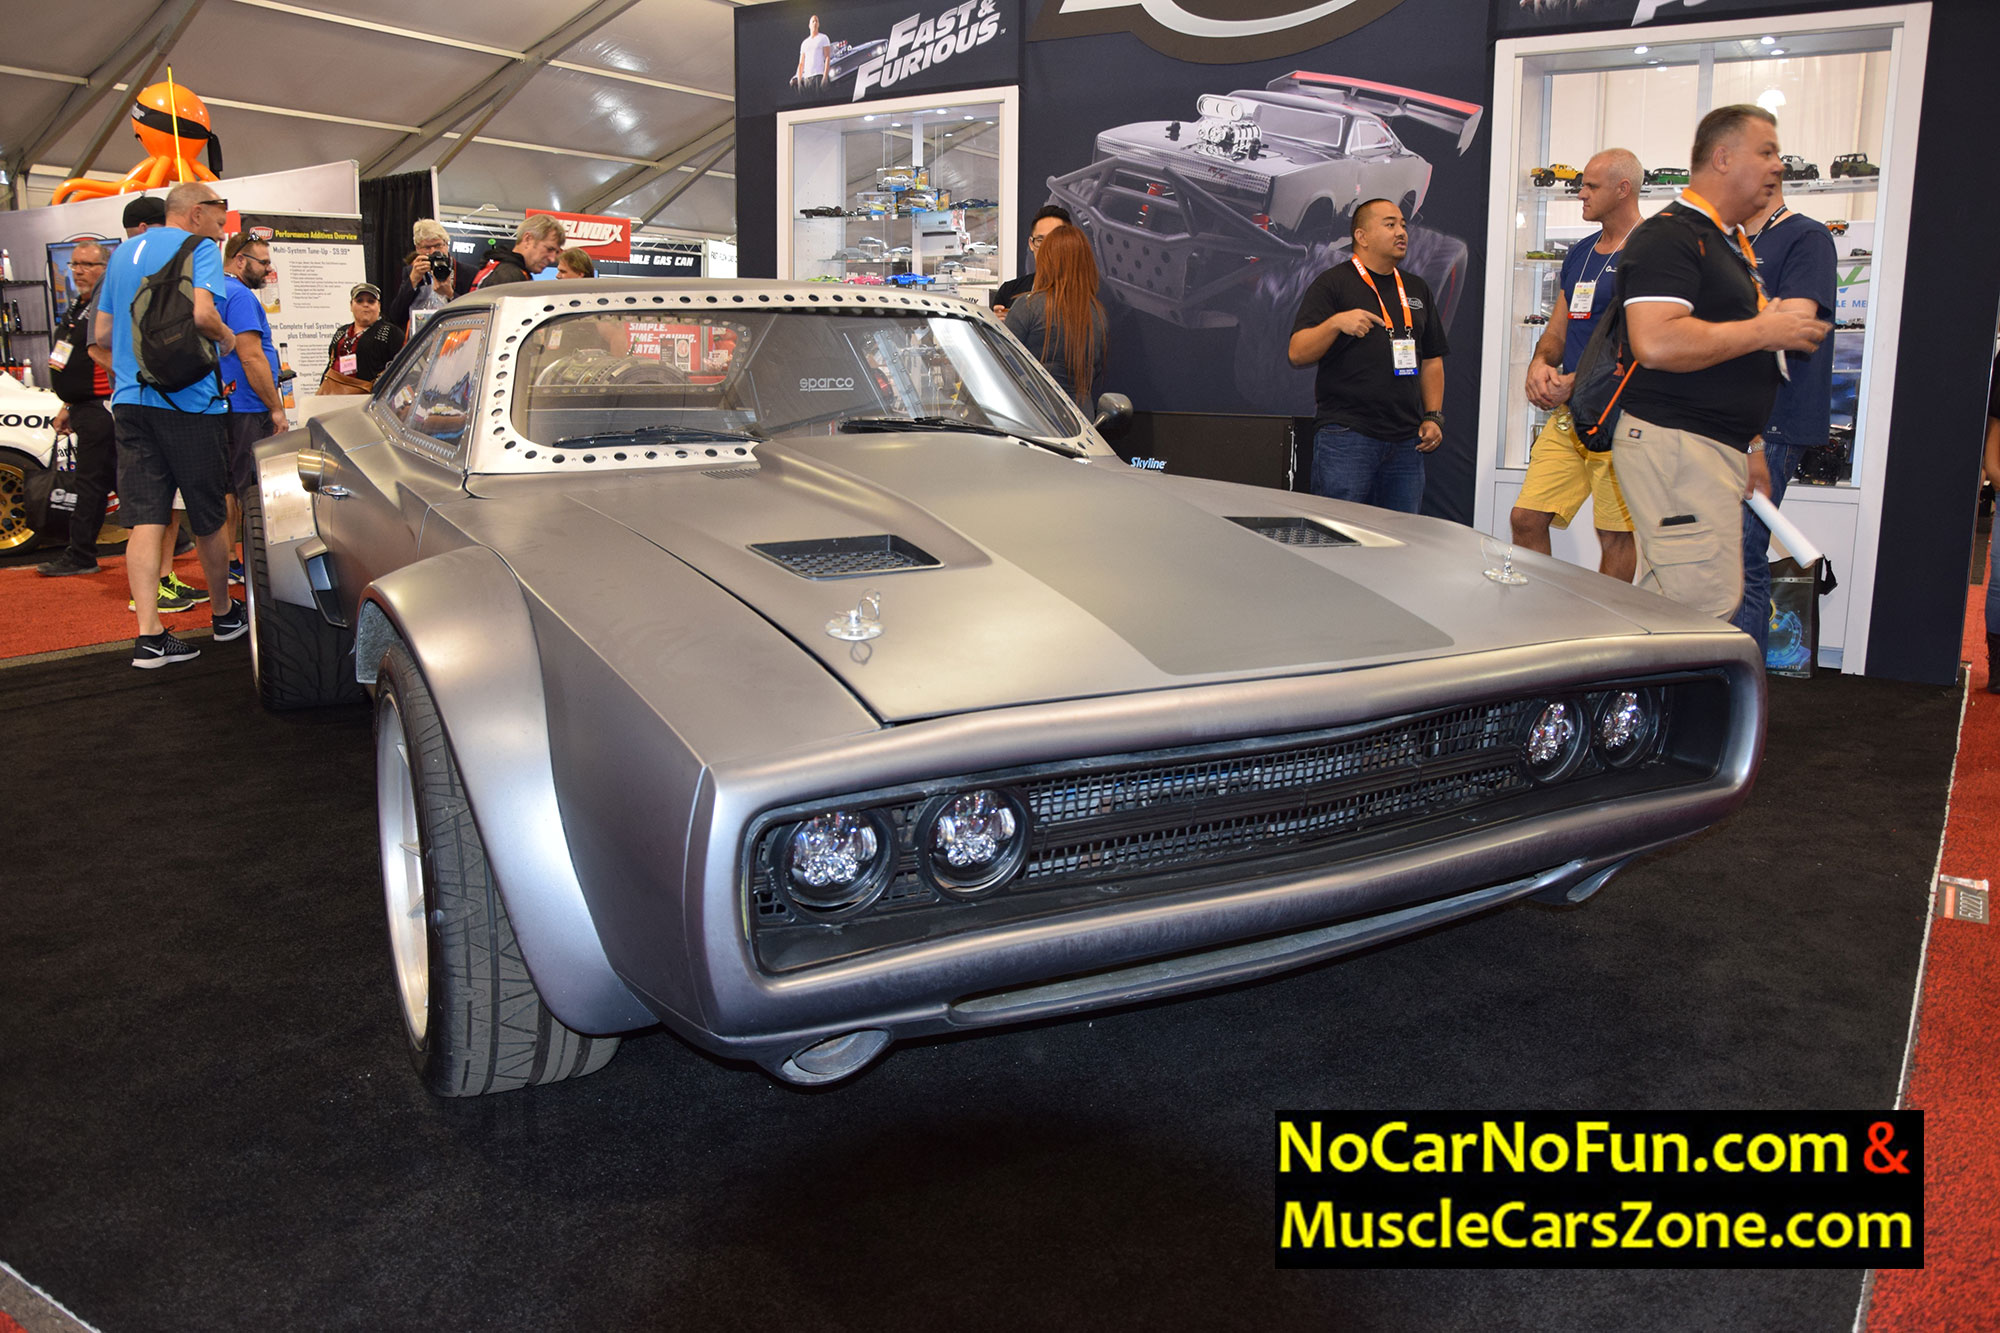 Dodge Charger RT From Fast & Furious 1 - 2016 SEMA SHOW